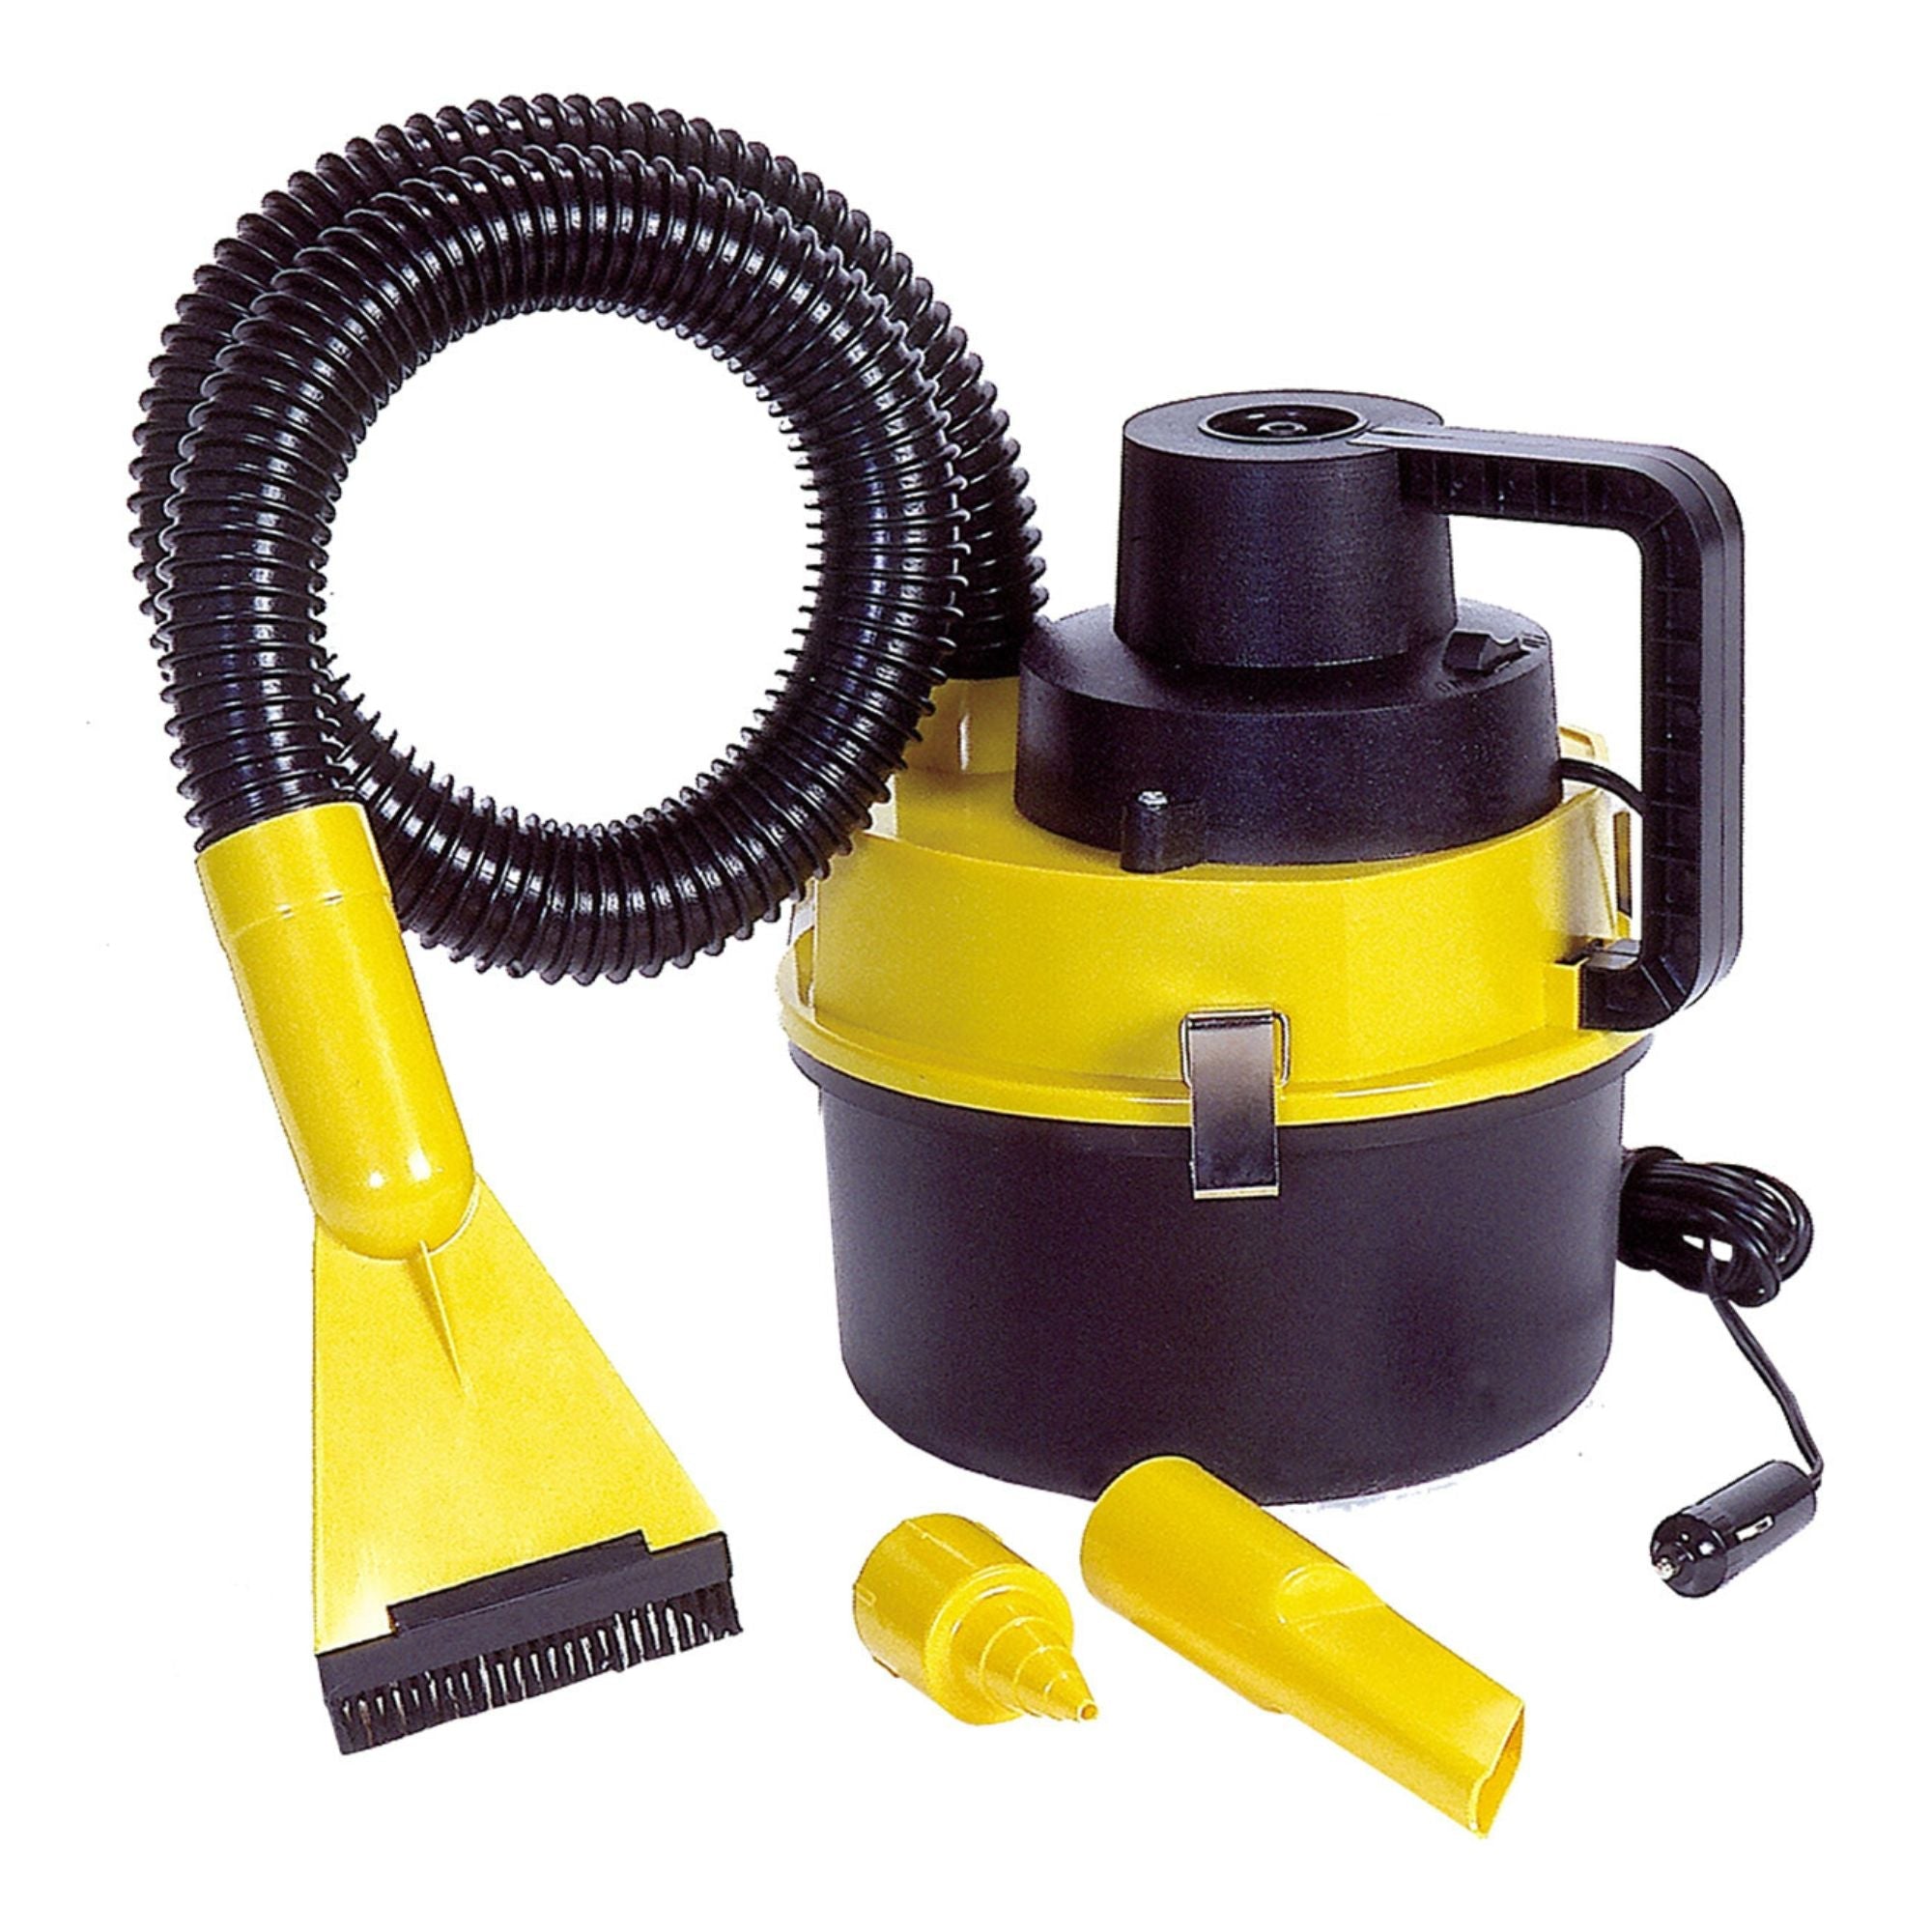 Product shot of 12V portable canister vacuum and inflator on a white background with the 12V power cord and 4 nozzle attachments visible